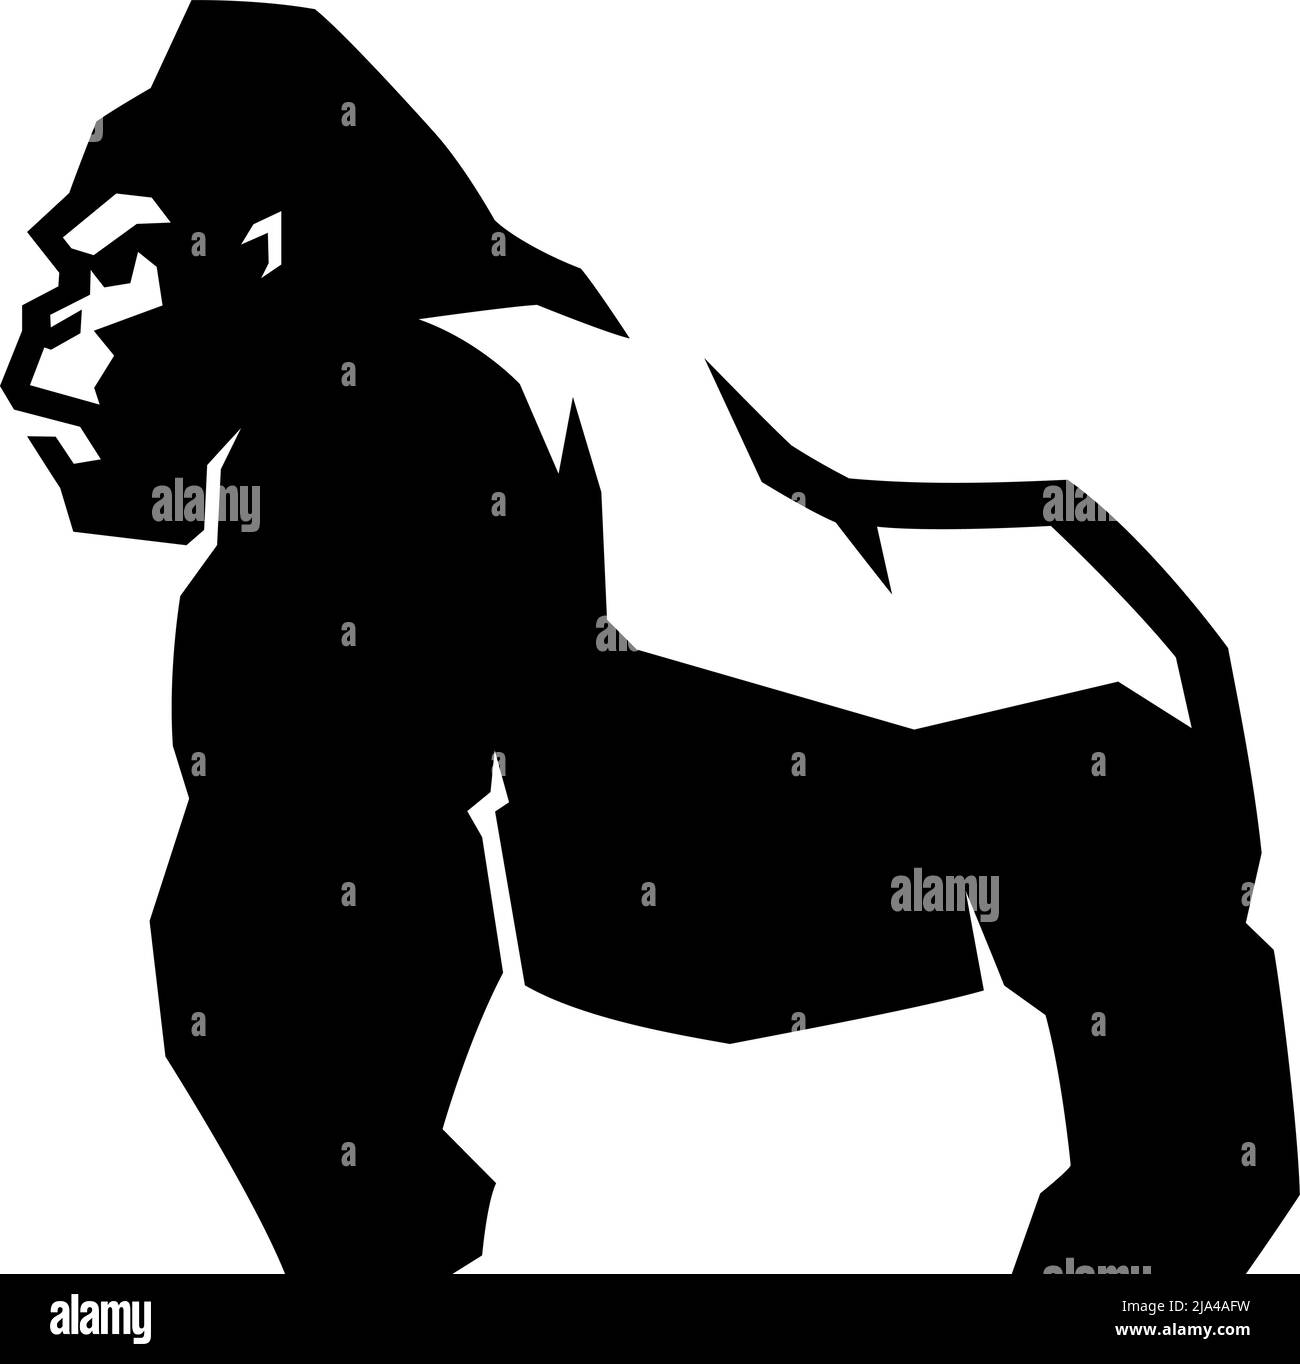 Edgy Simple Illustration Side View of Silver Gorilla Standing Stock Vector